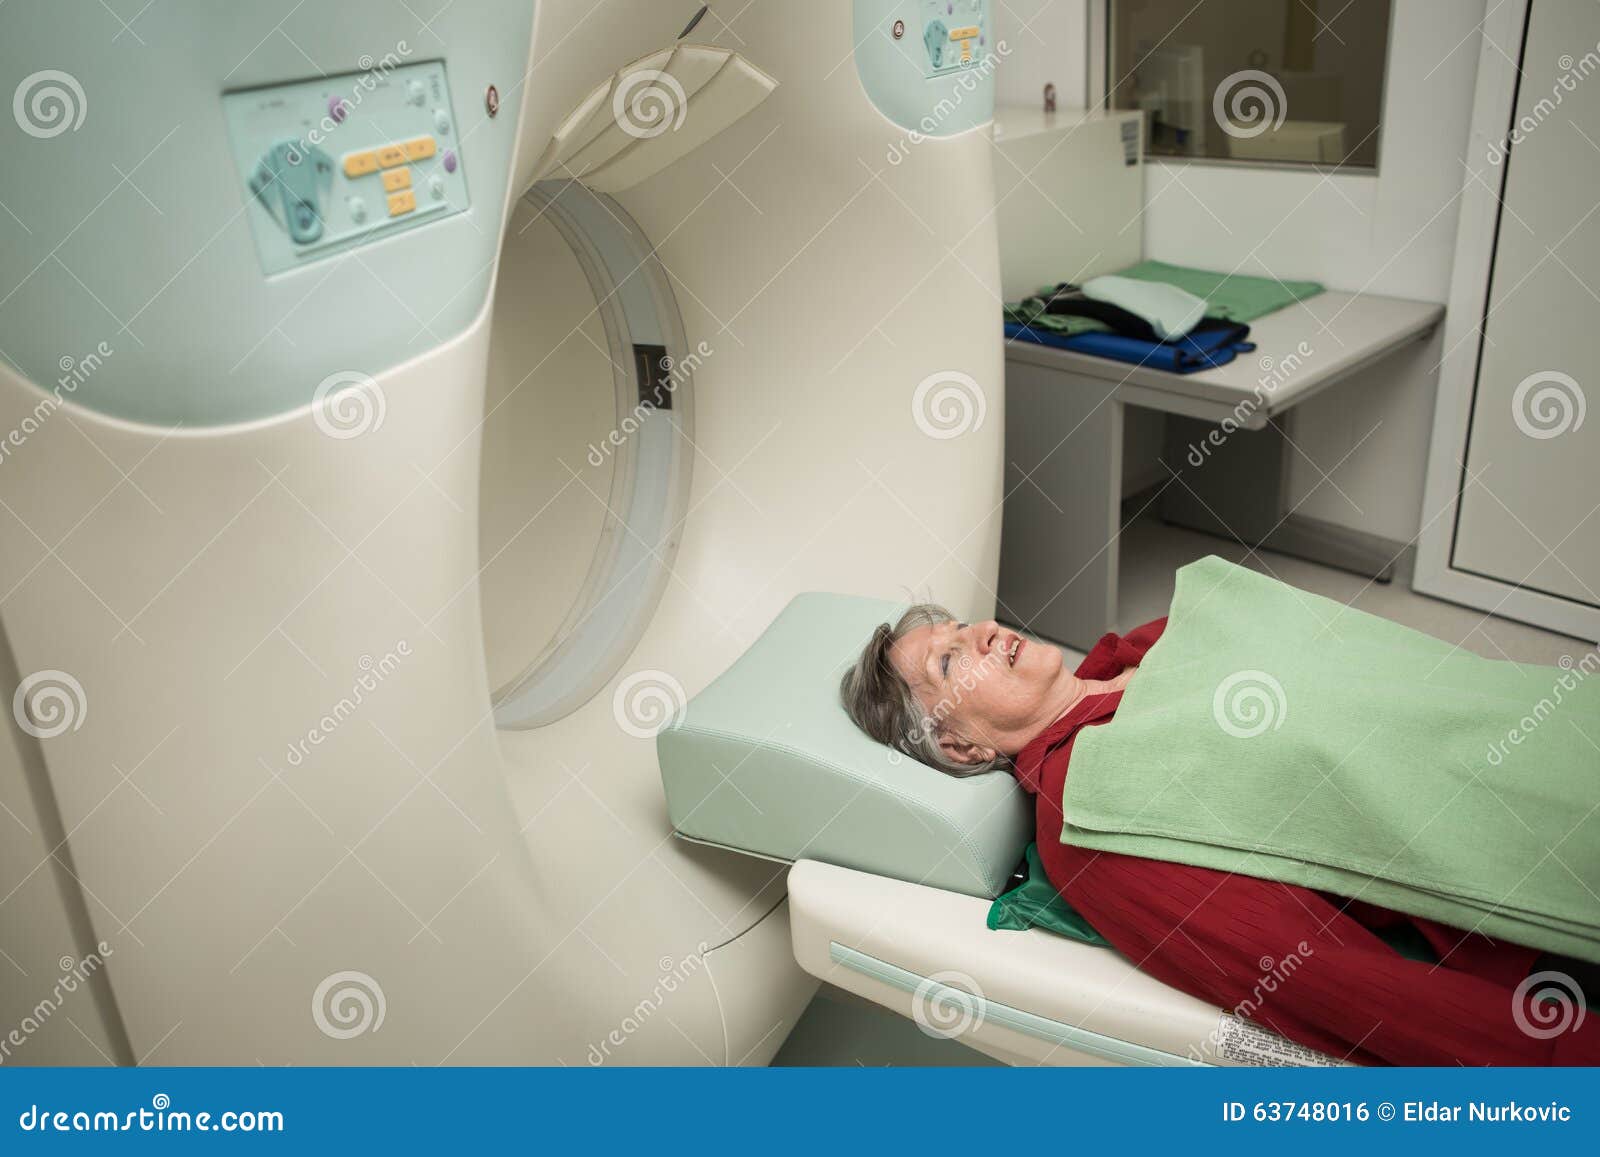 old woman patient at computerized axial tomography (cat) scan.examining cancer patient with ct.tumor detection